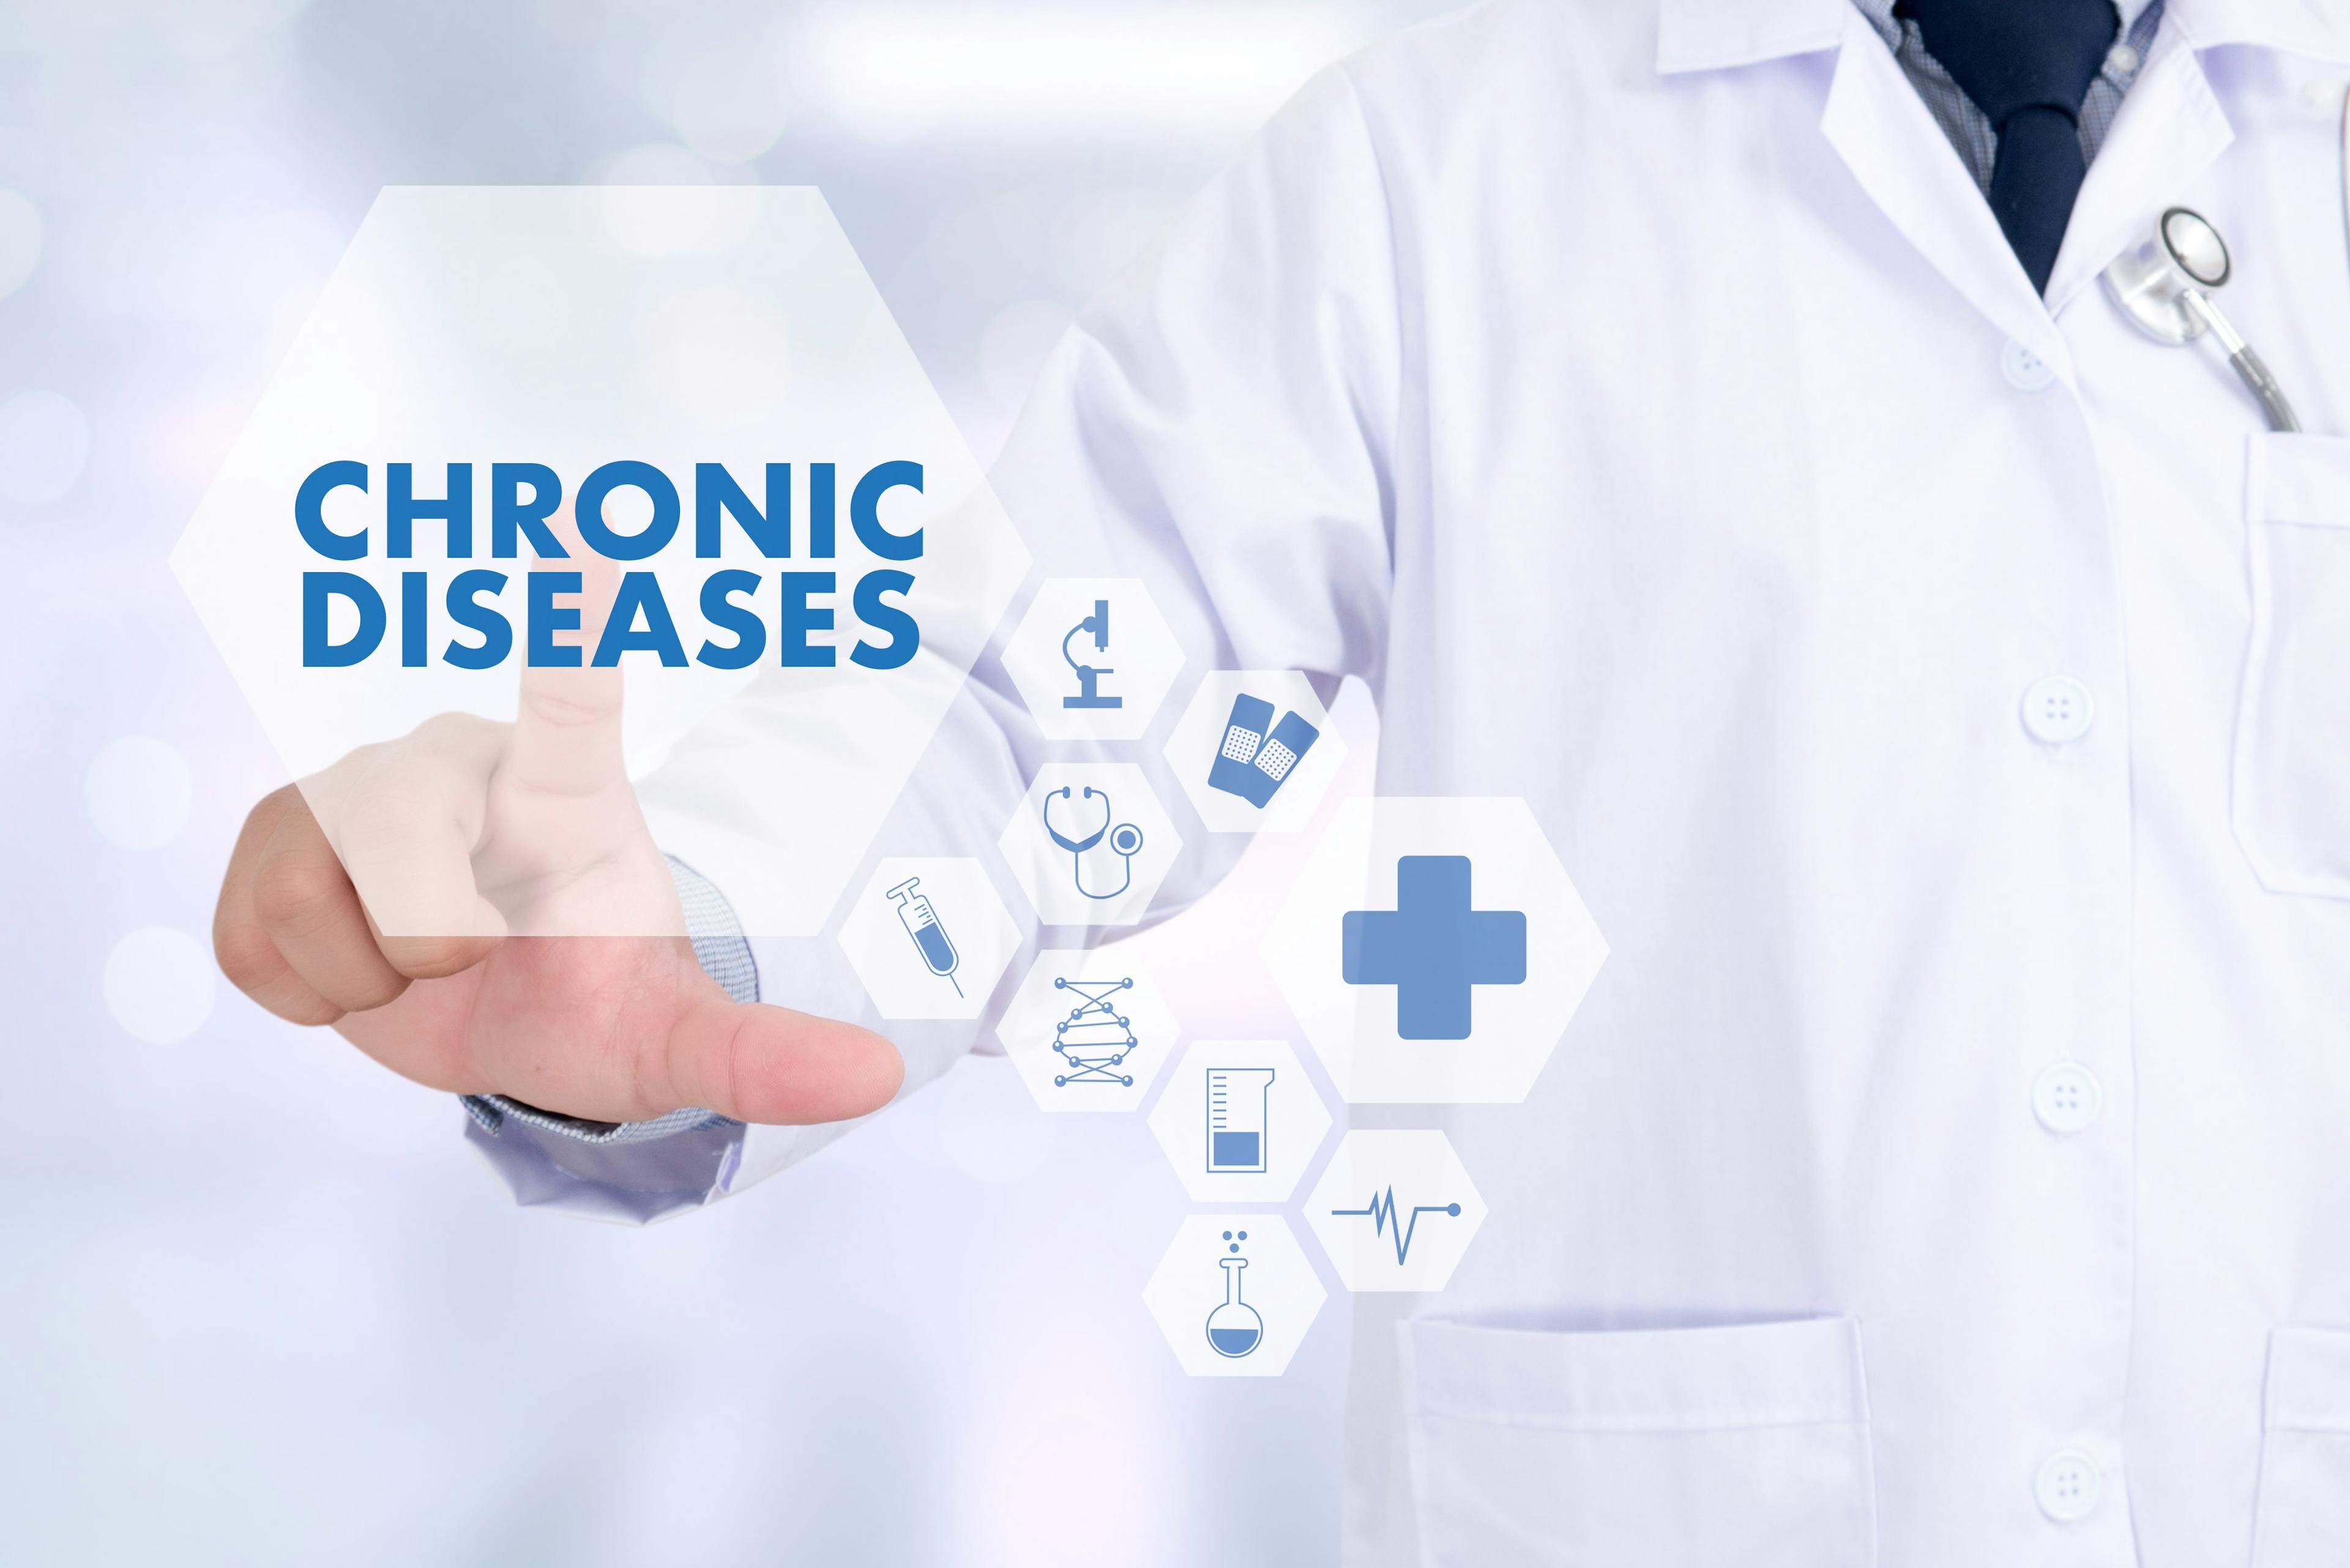 CHRONIC DISEASES Healthcare modern medical Doctor concept | Image credit: © onephoto - © stock.adobe.com